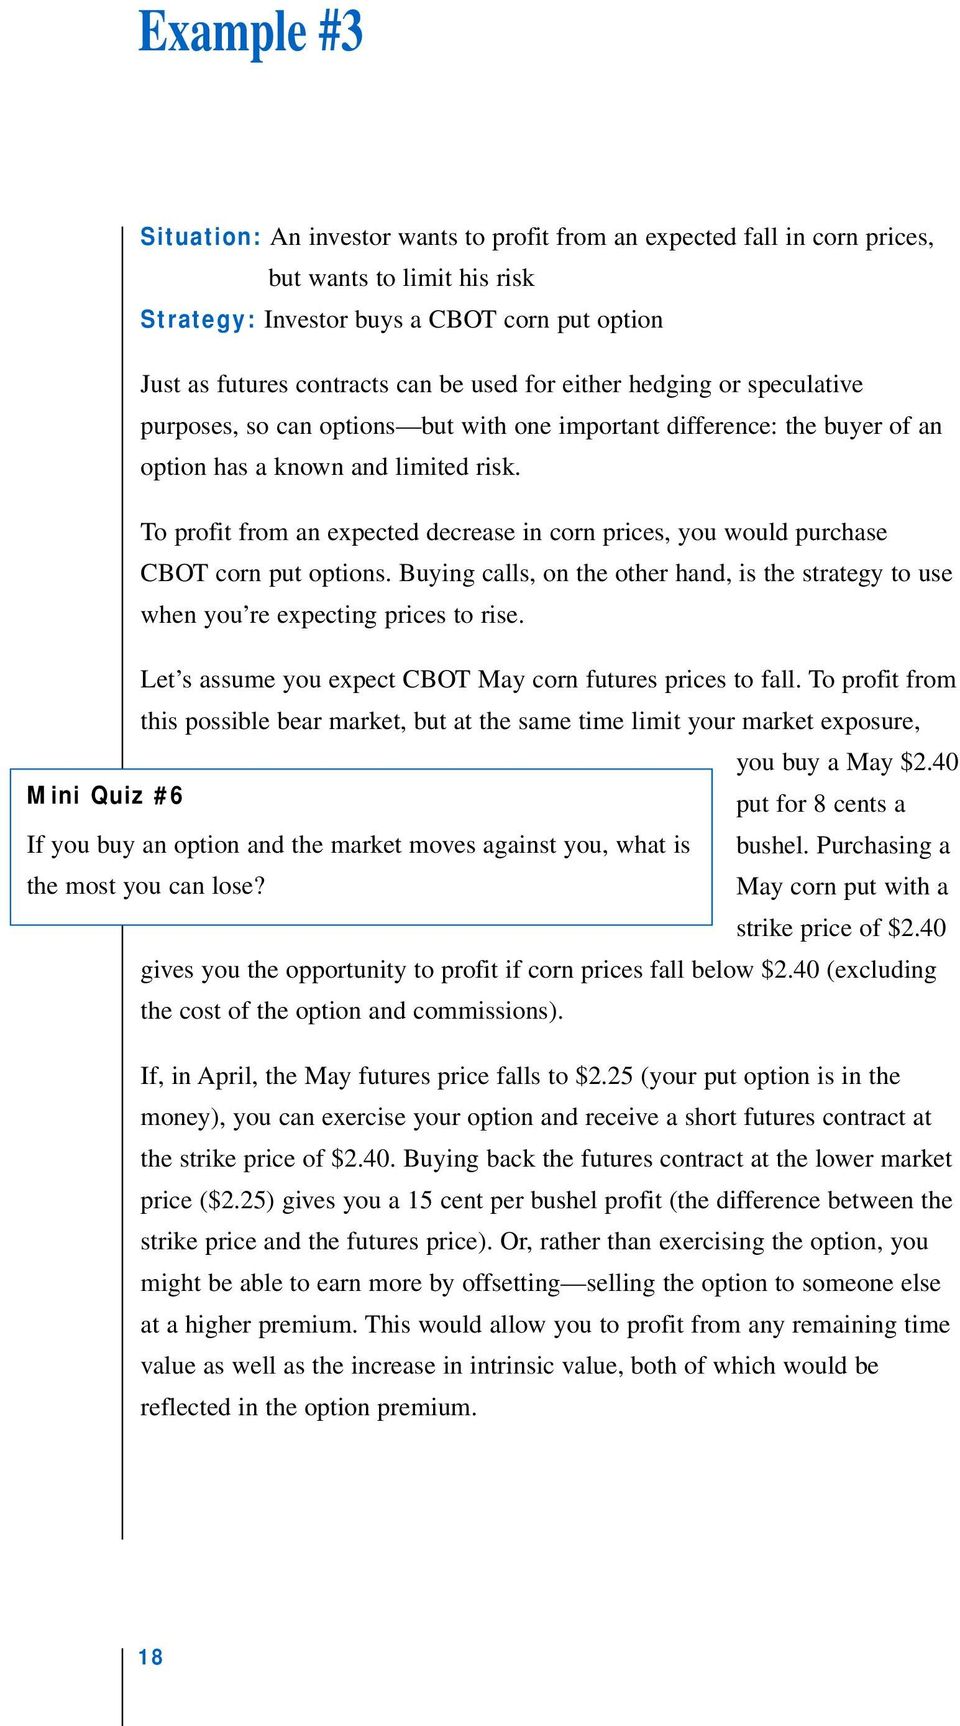 To profit from an expected decrease in corn prices, you would purchase CBOT corn put options. Buying calls, on the other hand, is the strategy to use when you re expecting prices to rise.